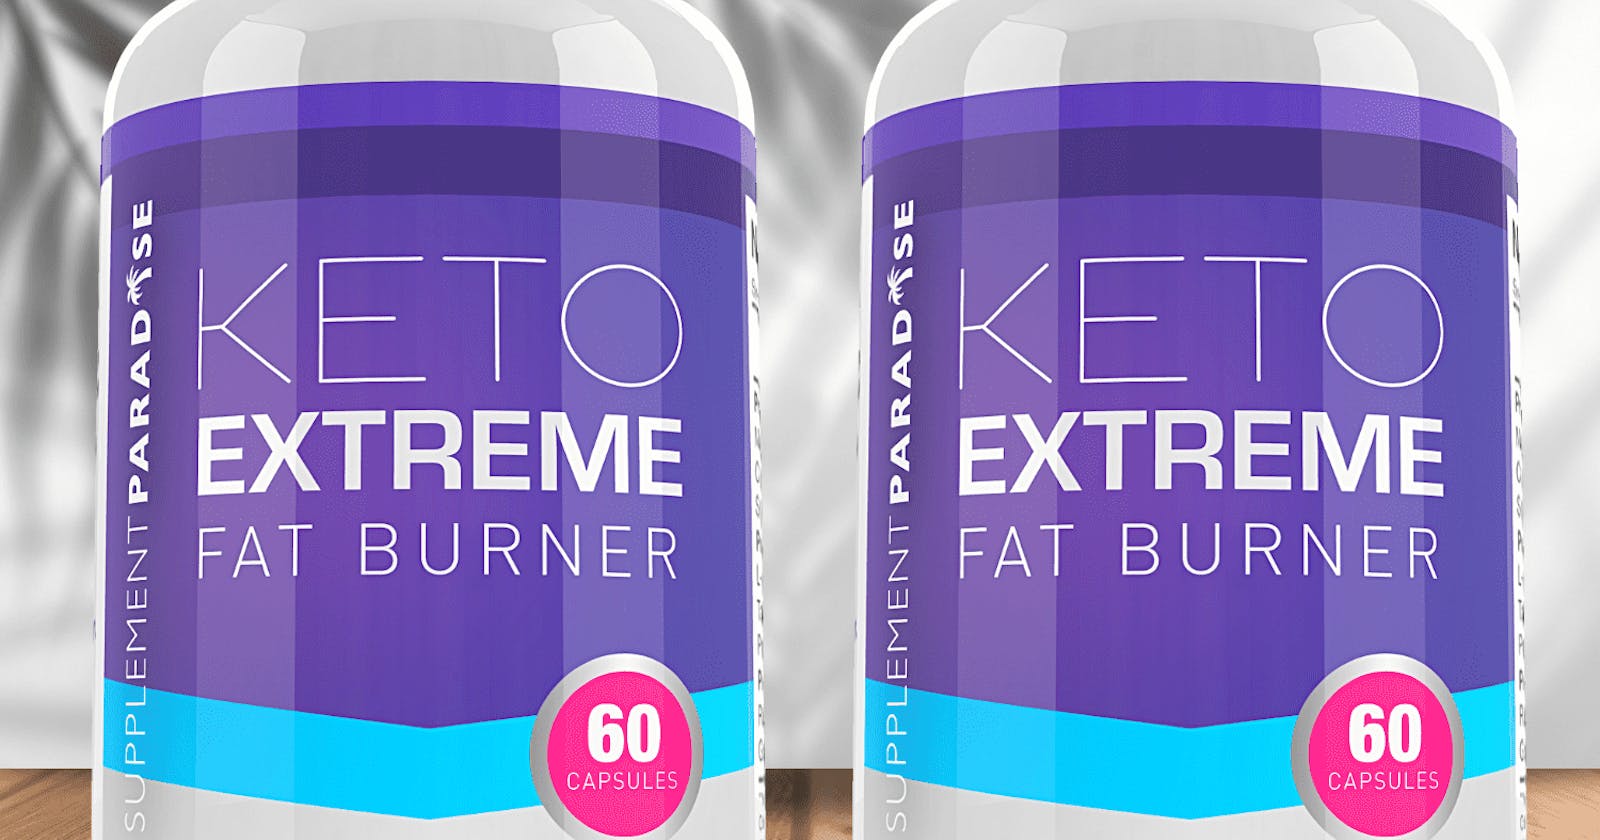 Keto Extreme Fat Burner Reviews 2023: Exposing the Facts, Does Keto Extreme Work?